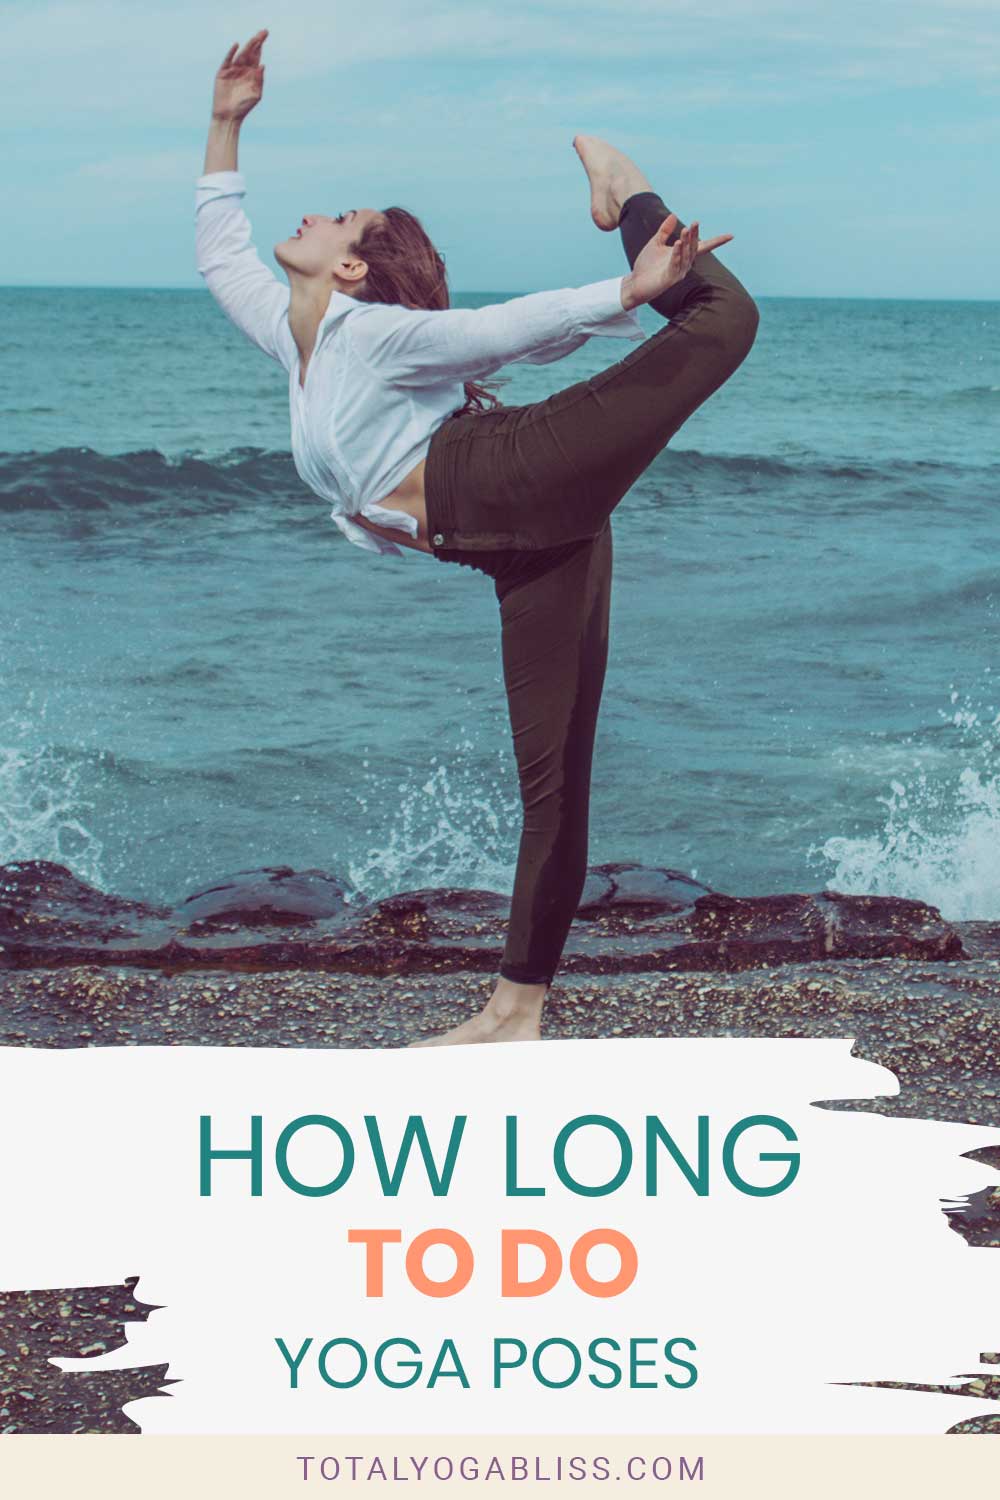 Woman in black pants and white shirt doing a yoga pose near ocean - How Long To Do Yoga Poses?